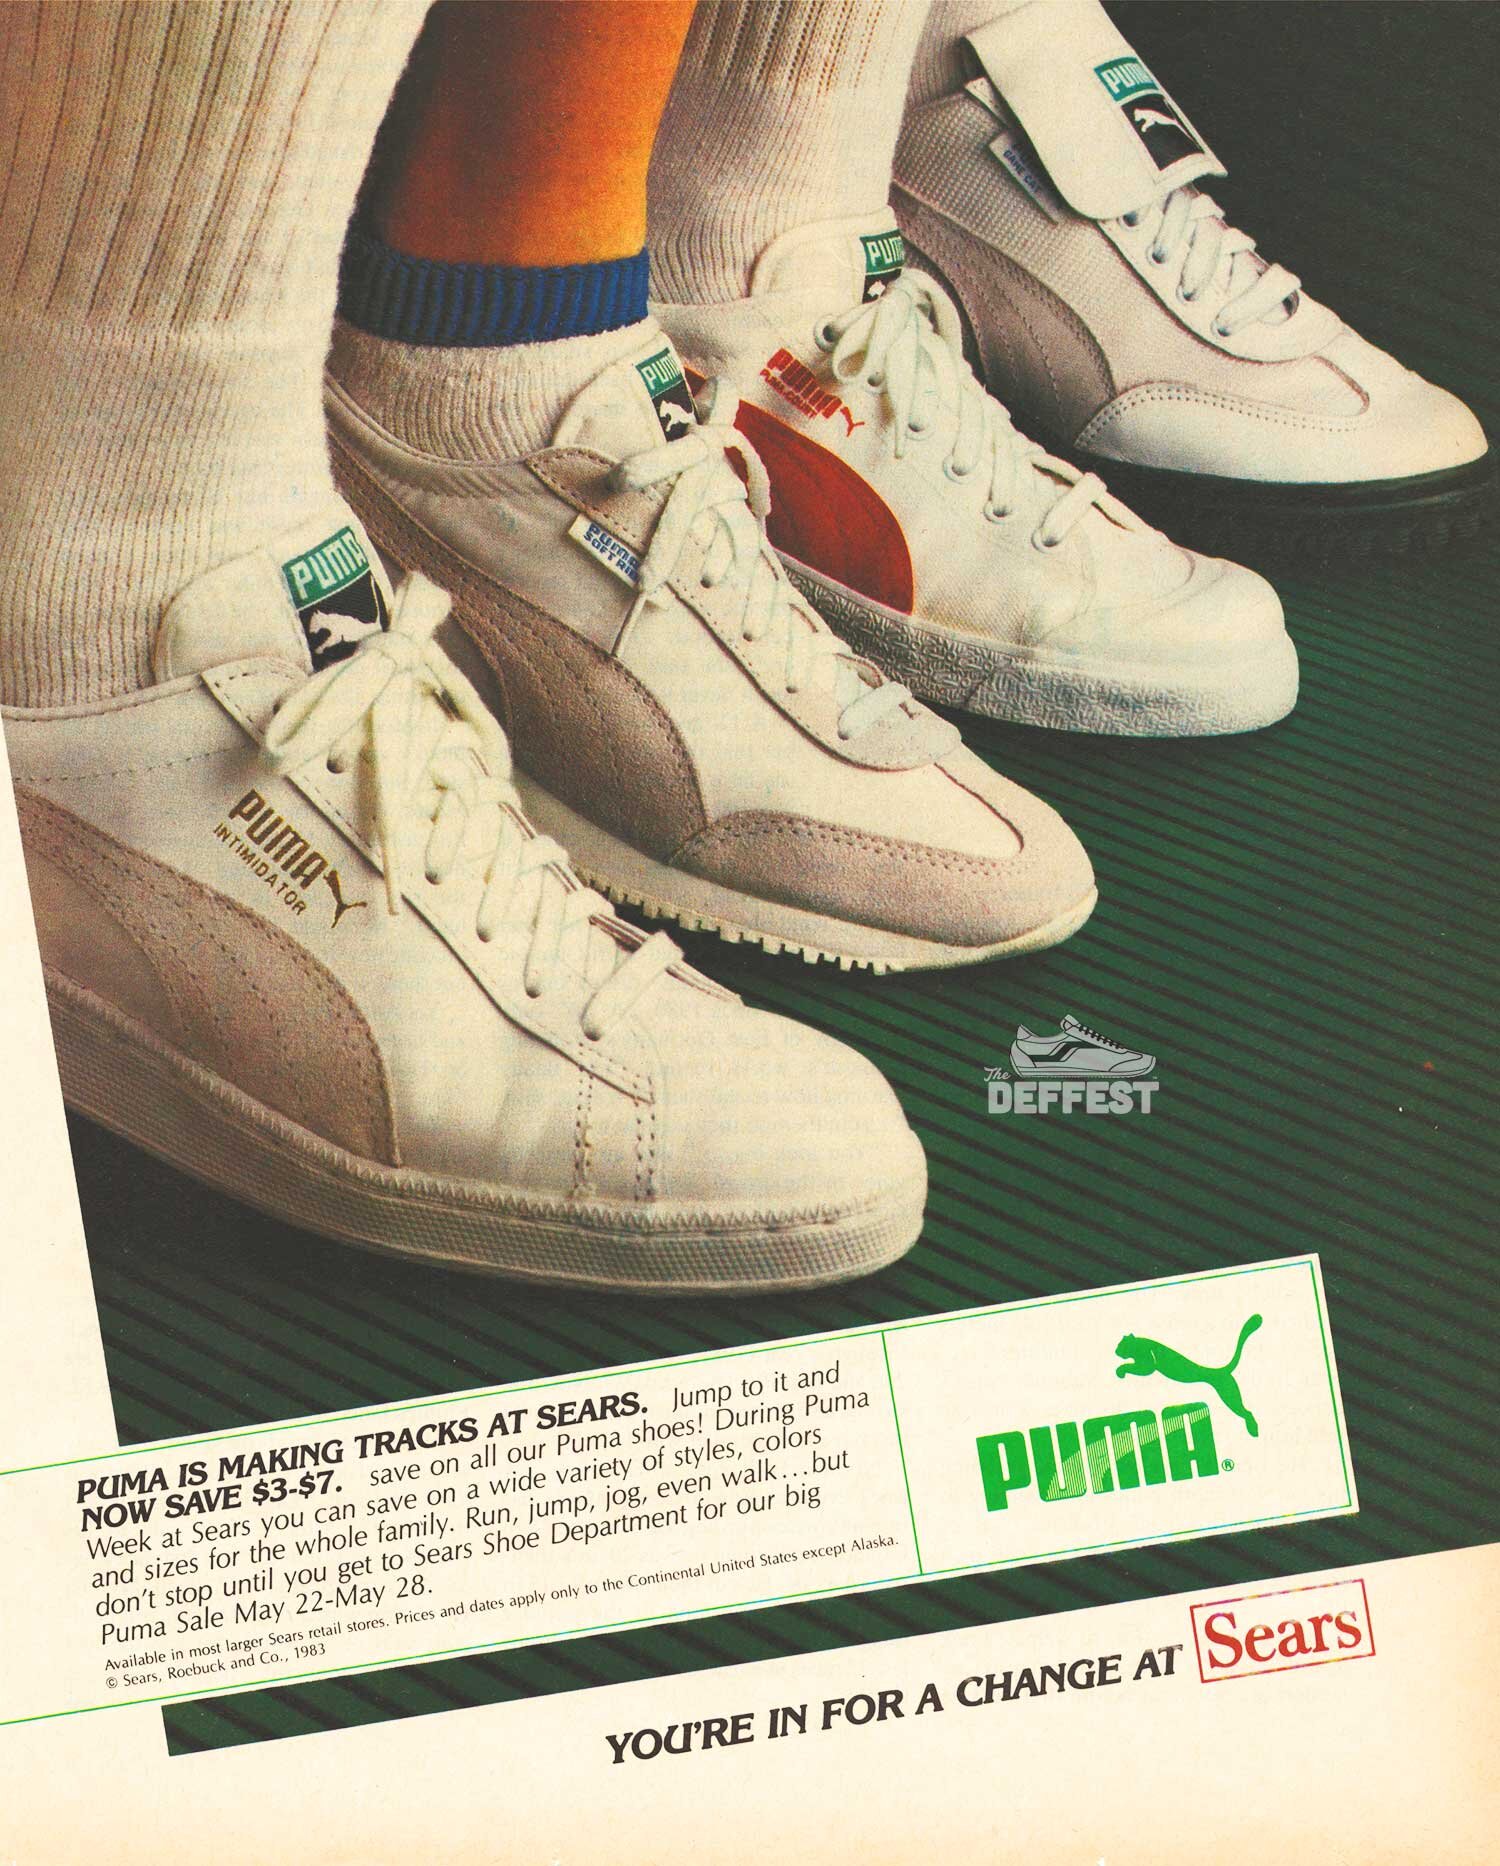 New Puma Shoes 1970s | peacecommission.kdsg.gov.ng